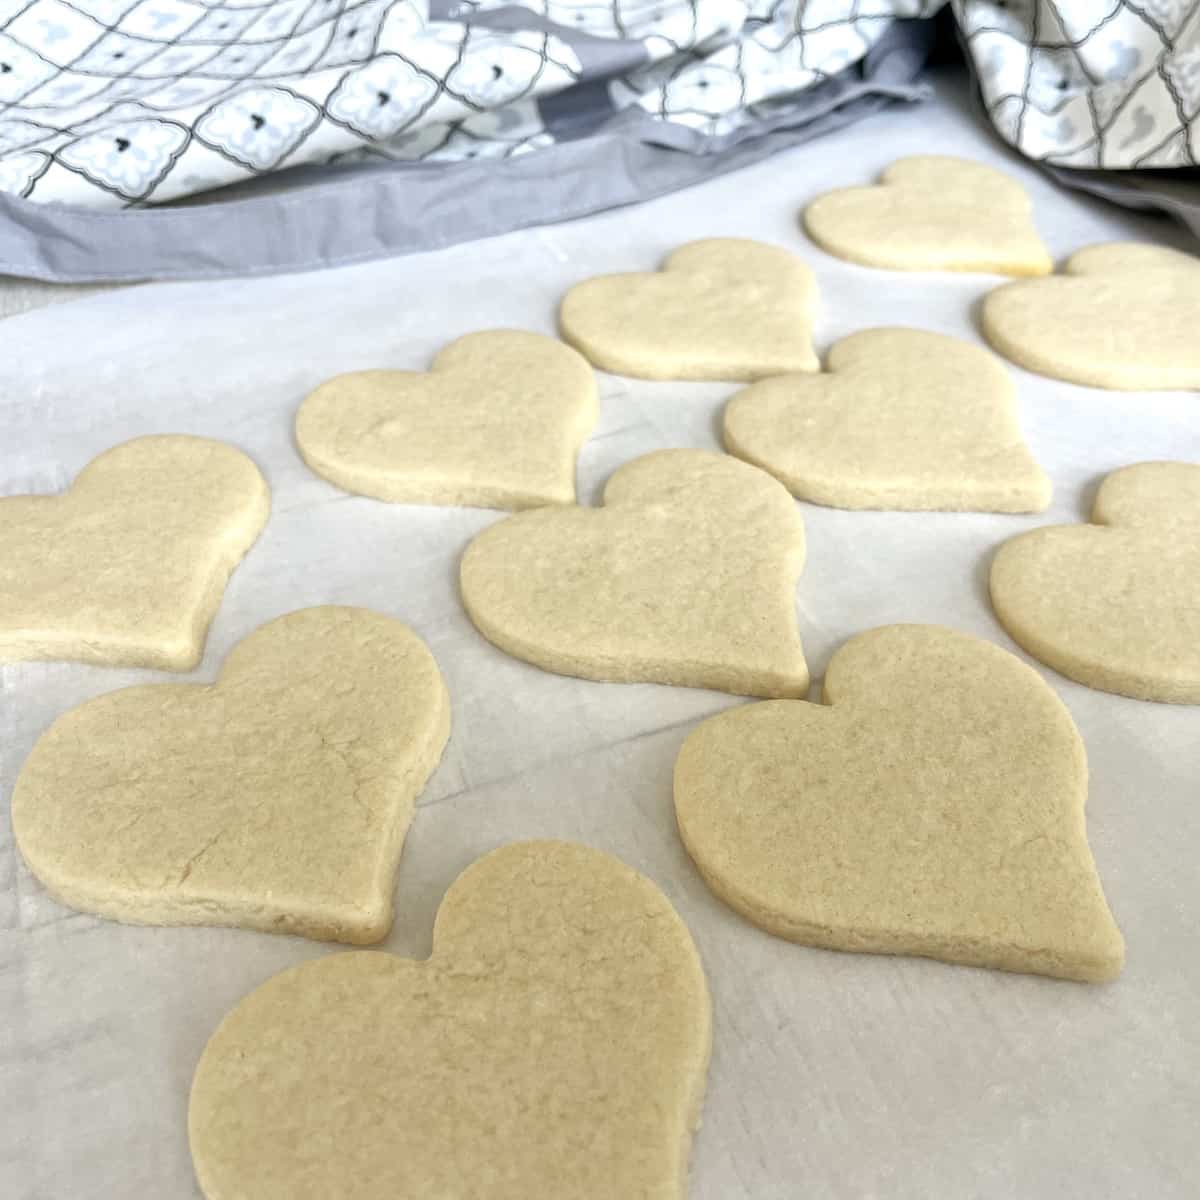 baked heart shaped sugar cookies on a white piece of parchment paper with a white and grey apron in the background